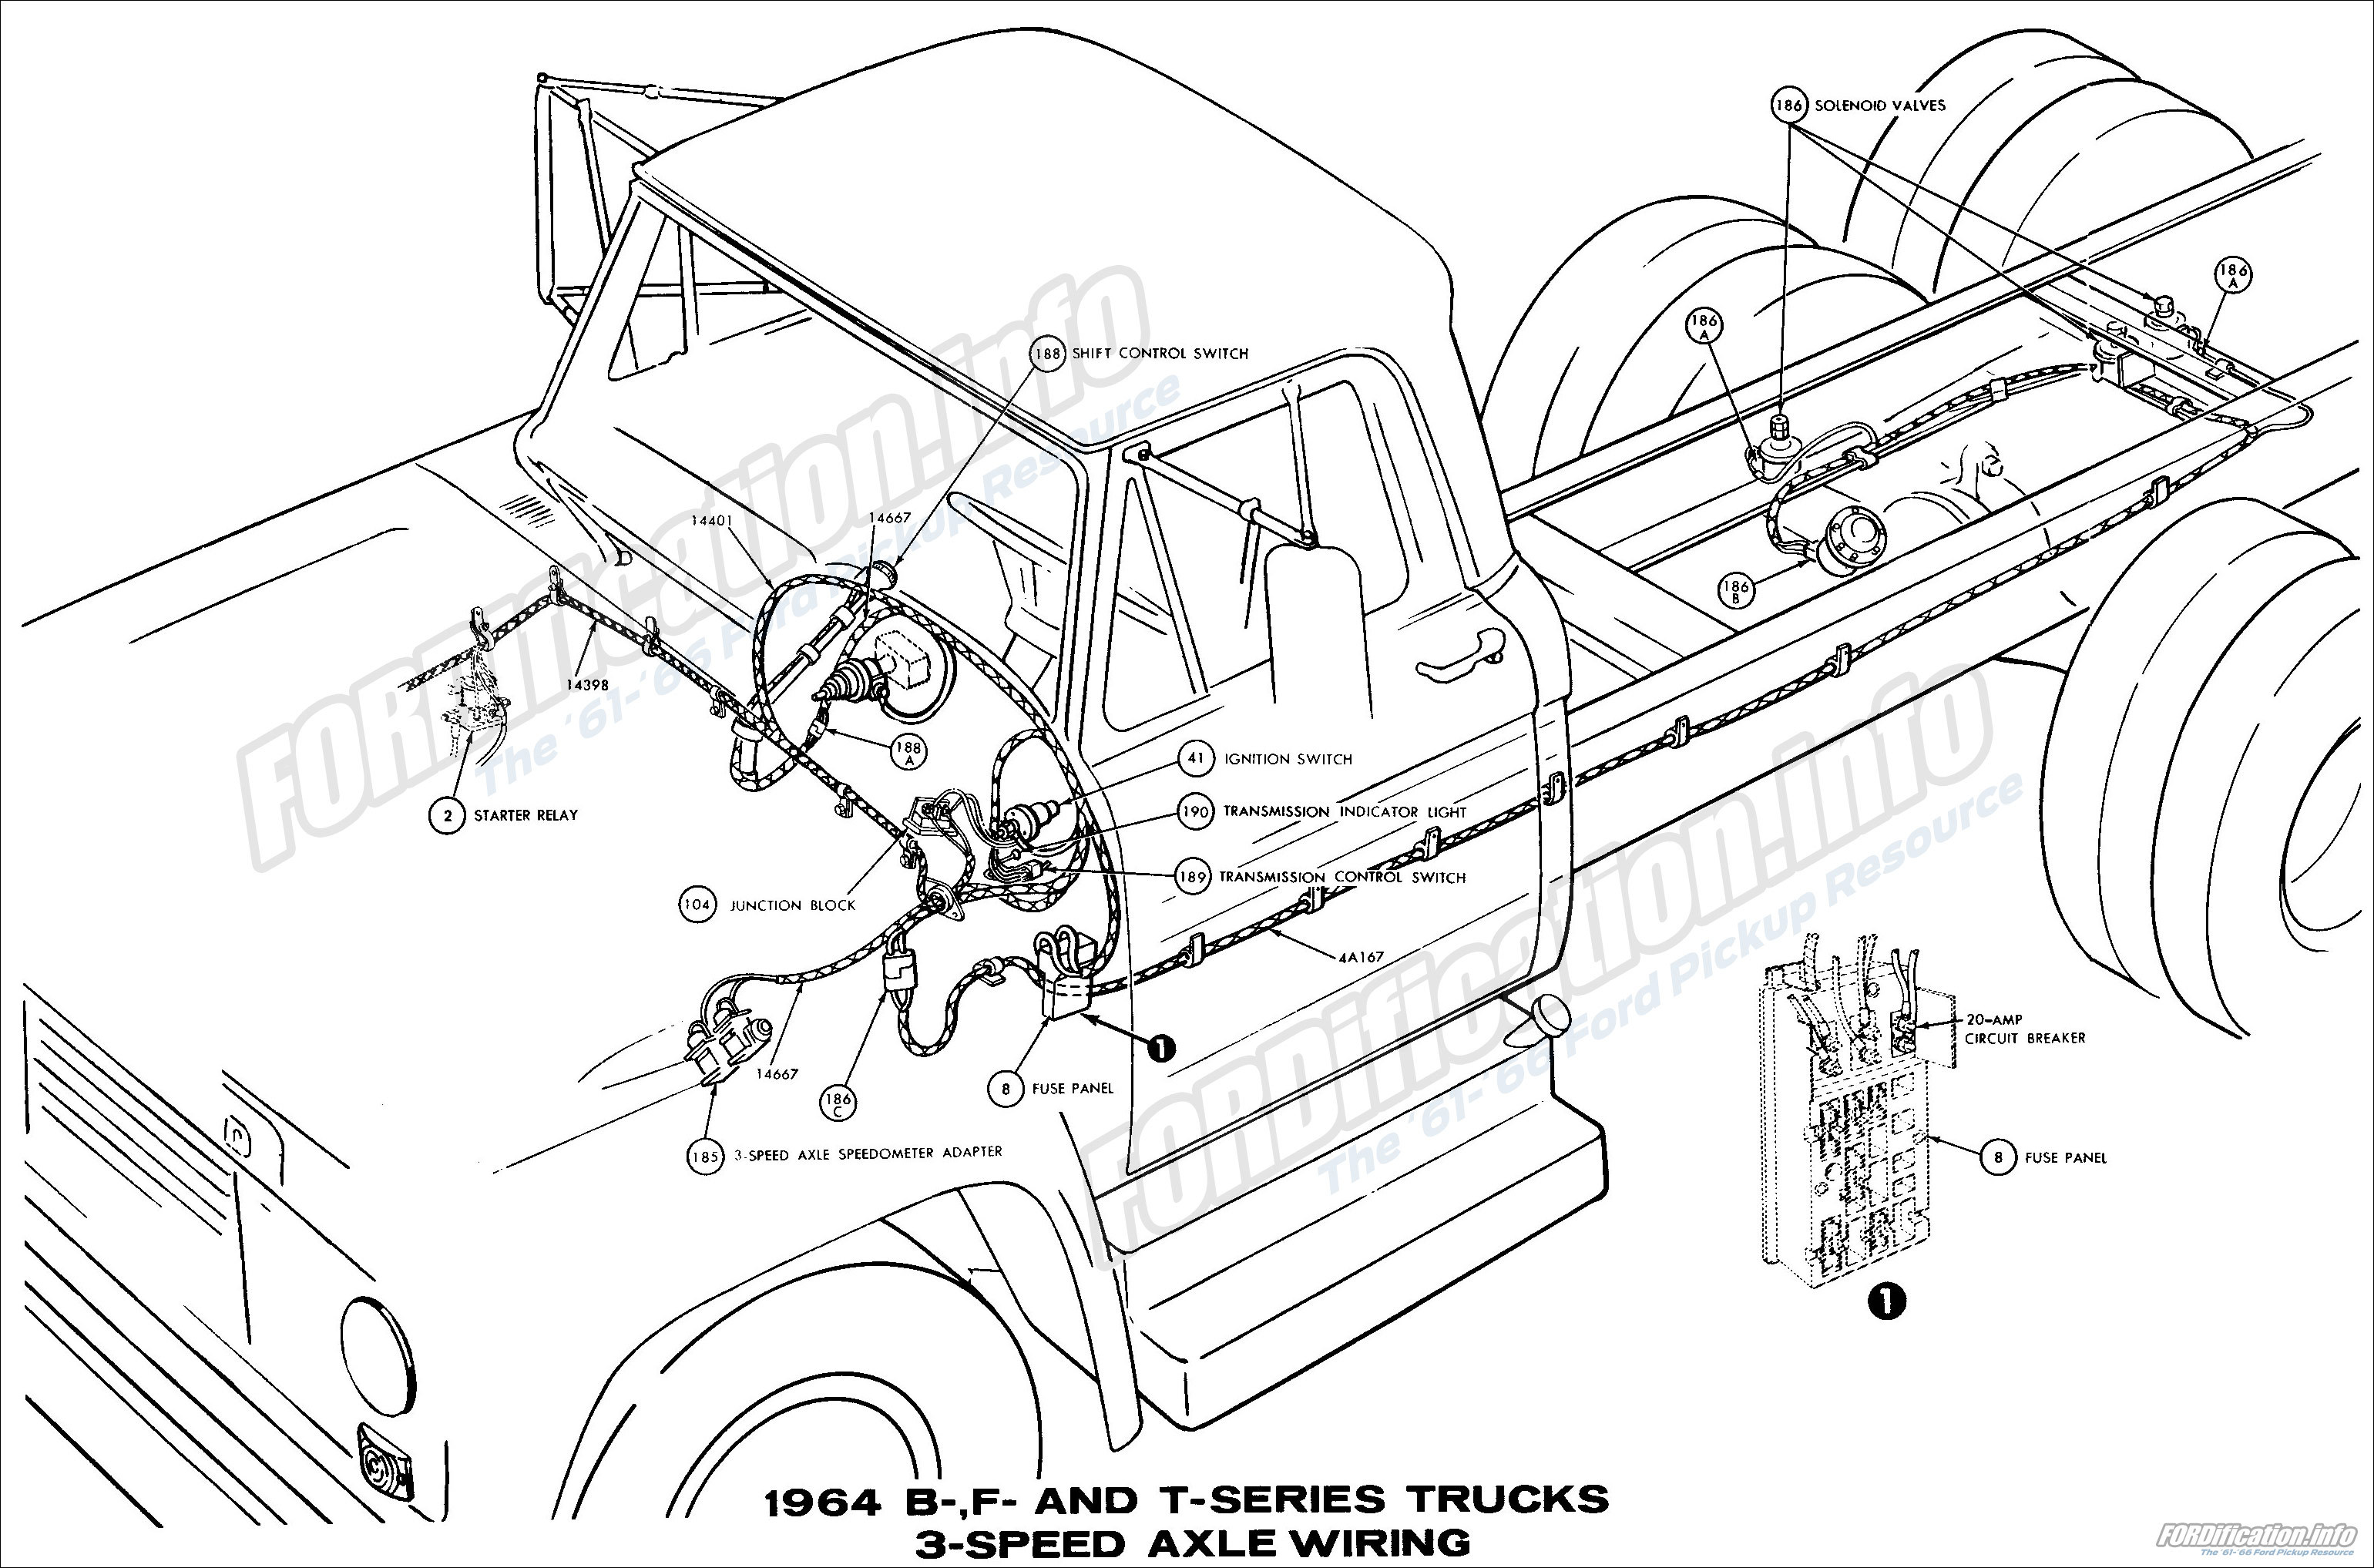 1964 Ford Truck Wiring Diagrams - FORDification.info - The '61-'66 Ford